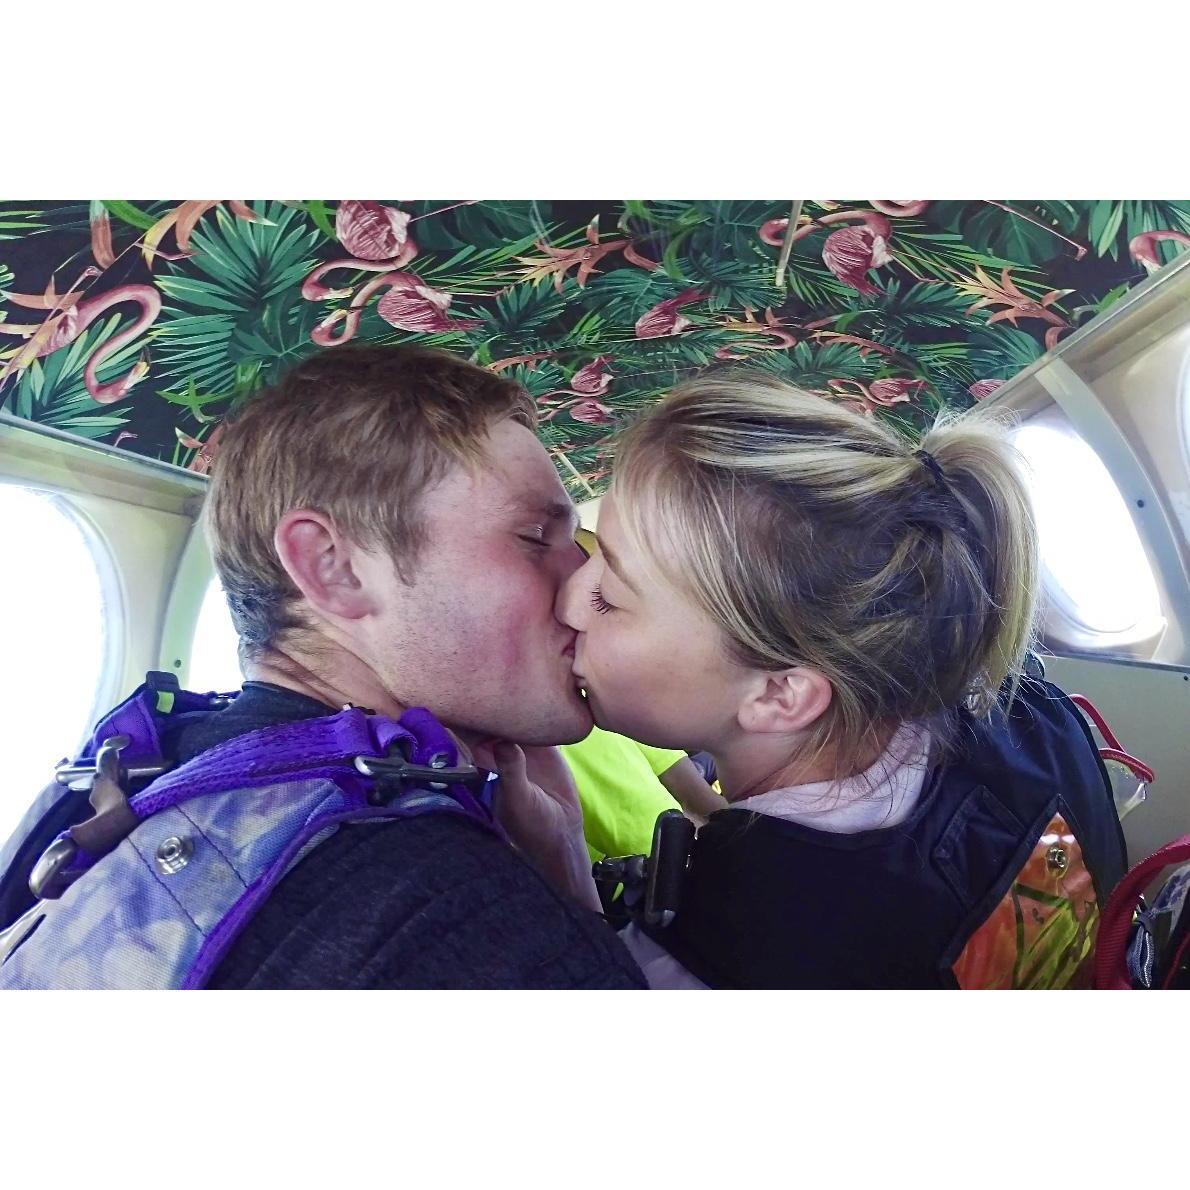 Last kiss before we jumping out of a plane!